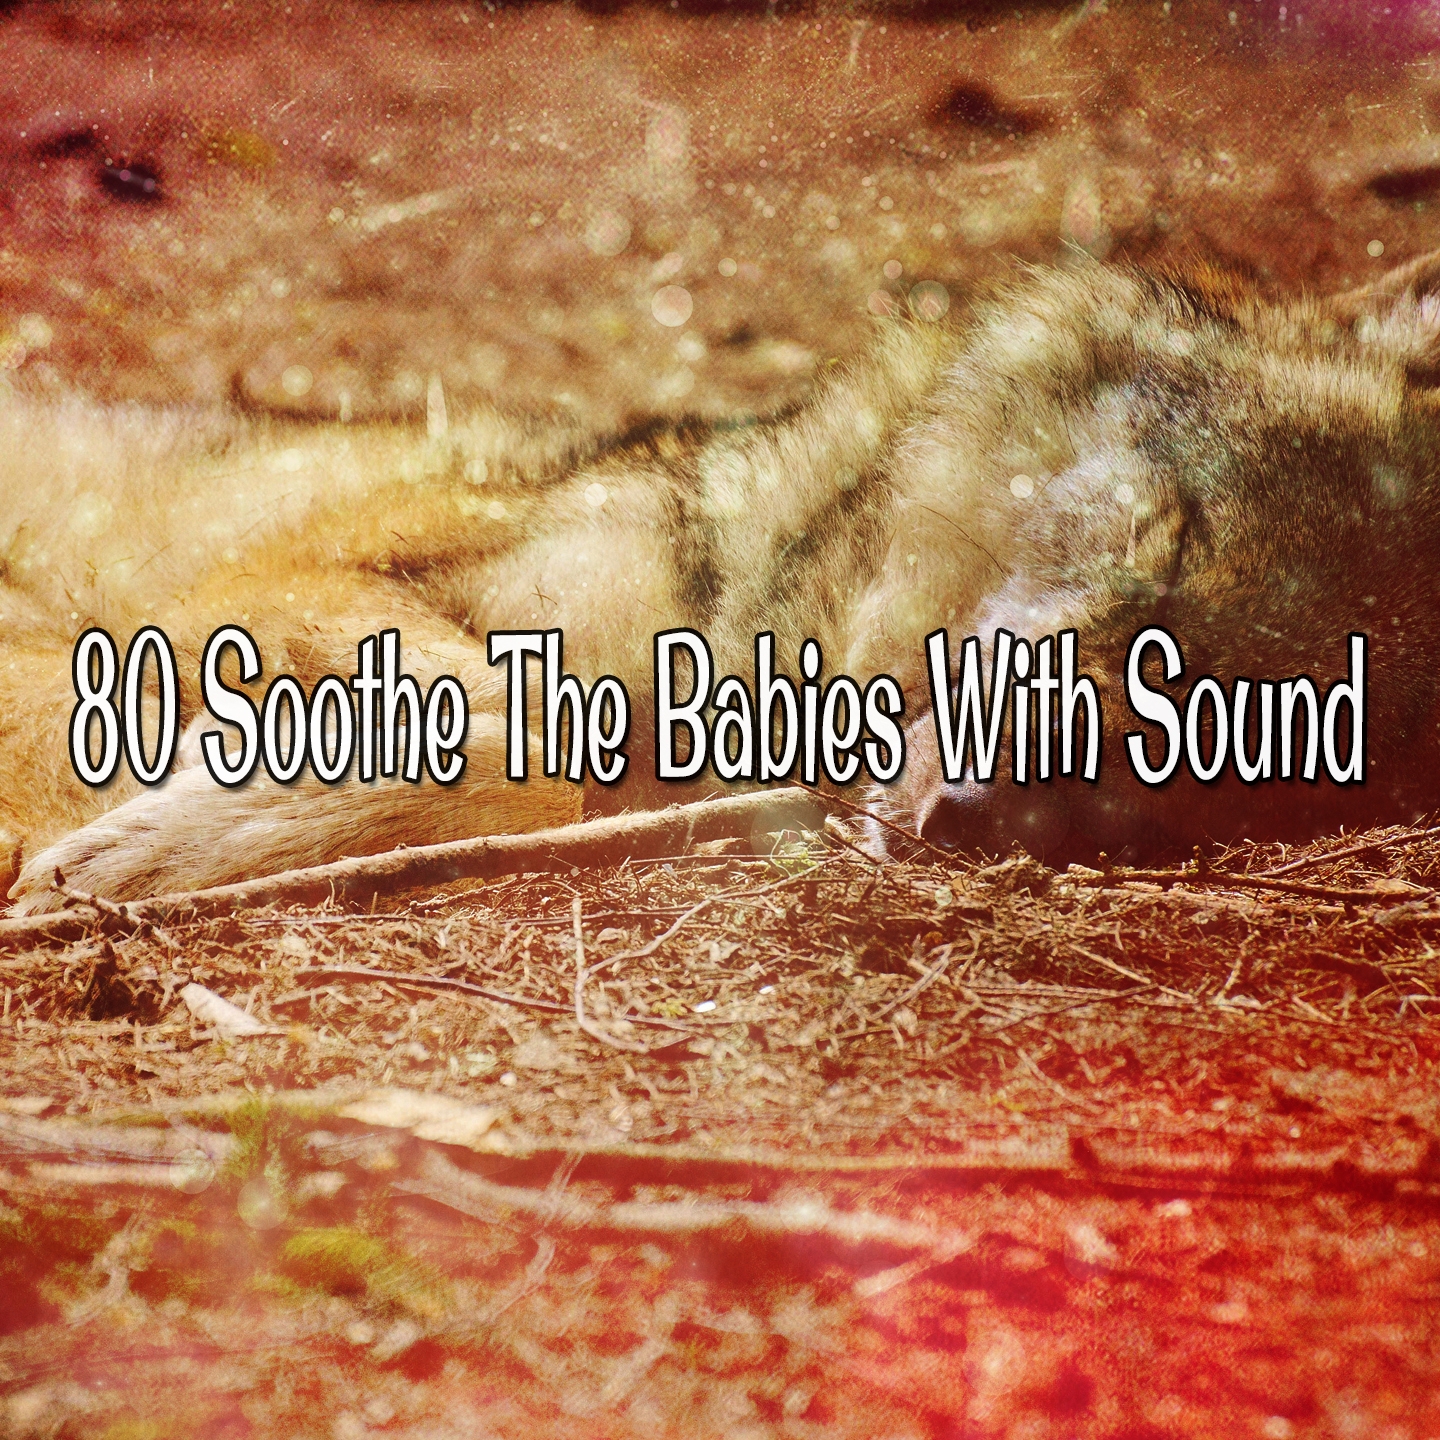 80 Soothe The Babies With Sound